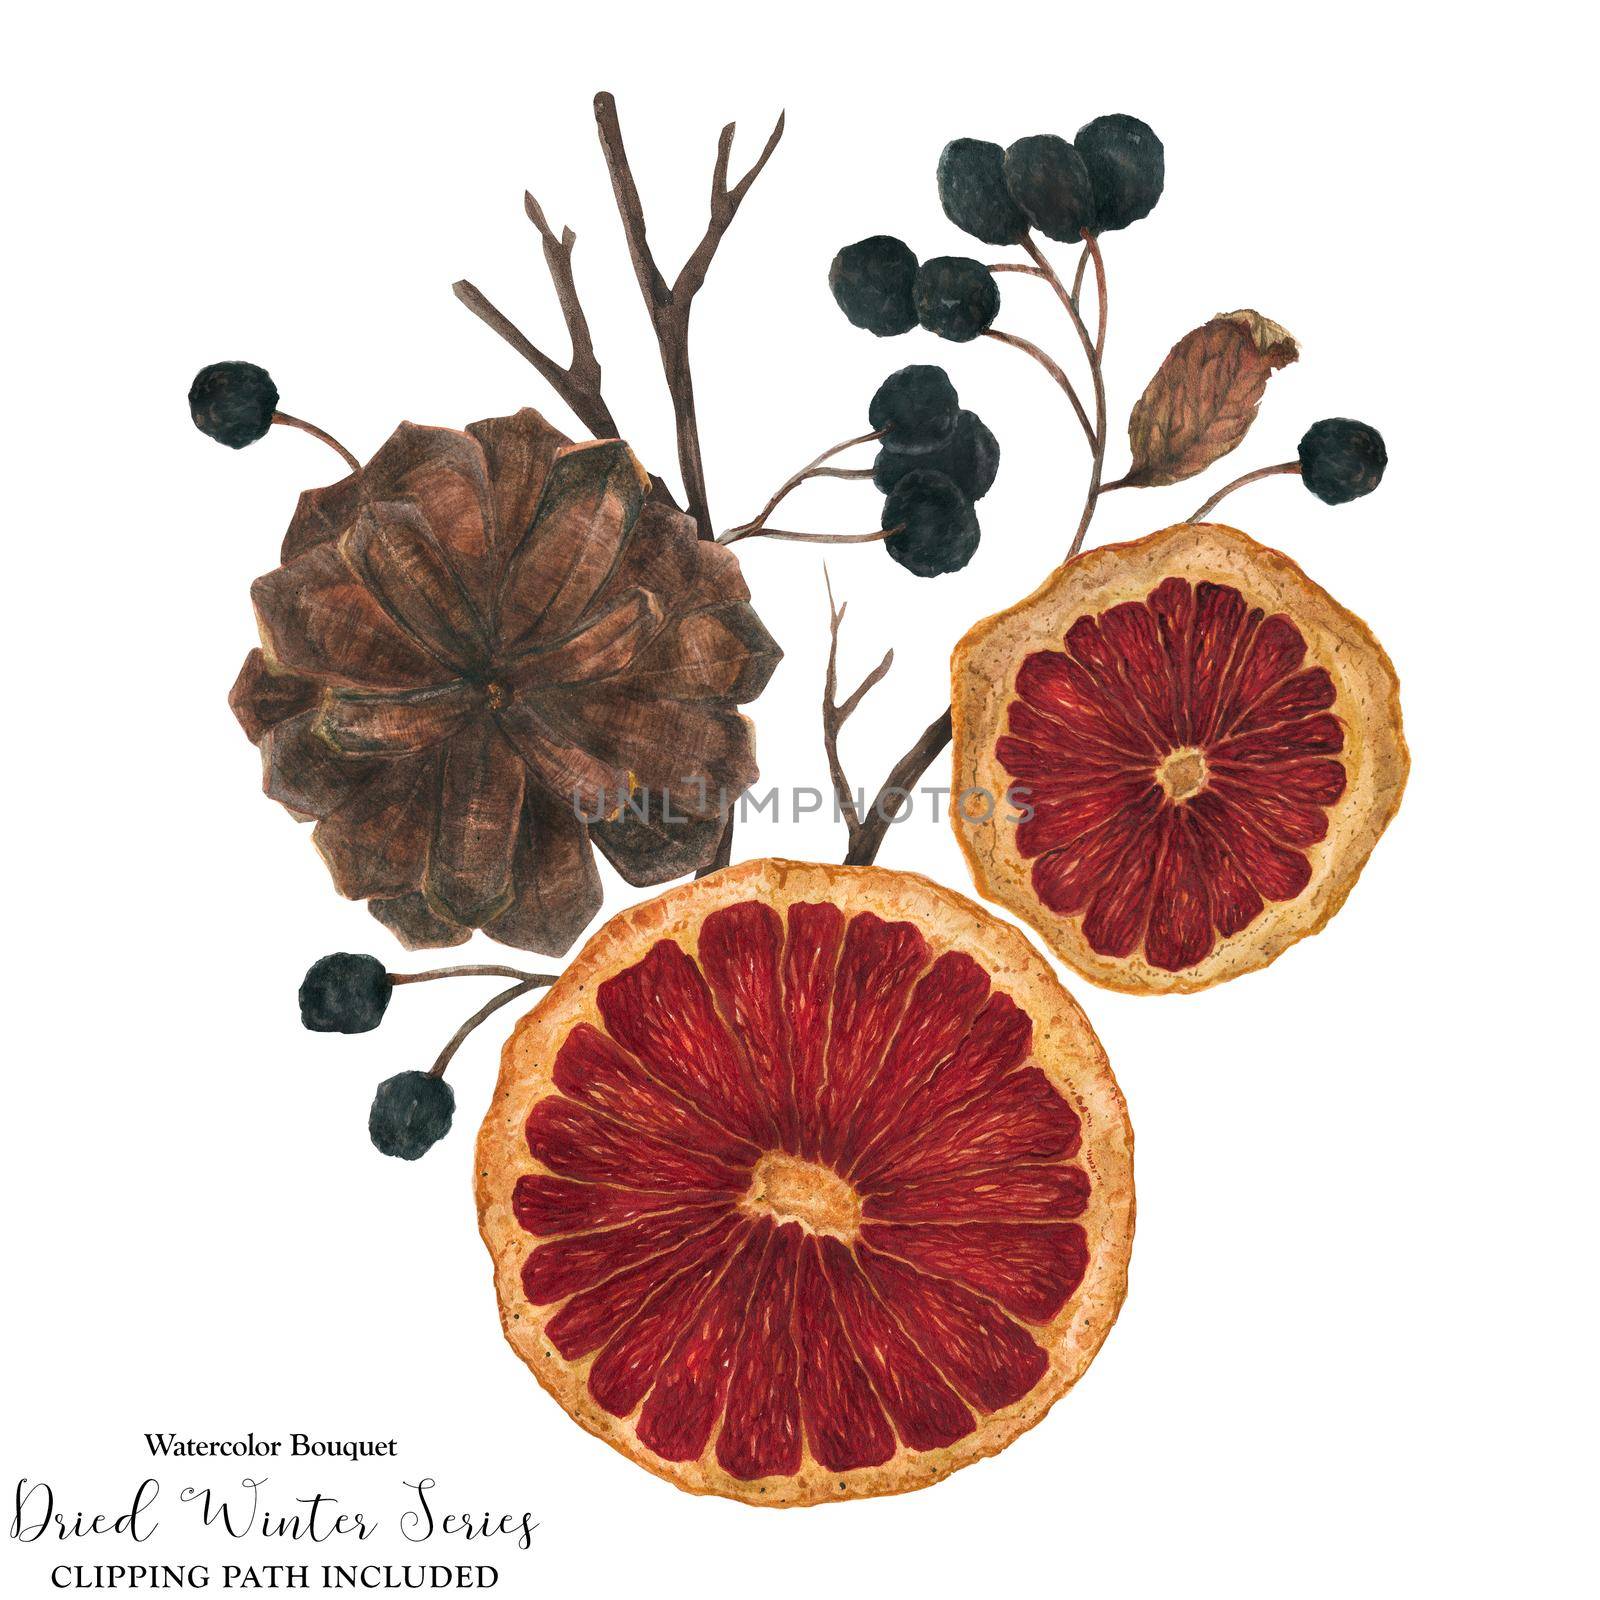 Christmas bouquet with dried oranges and winter plants, watercolor with clipping path